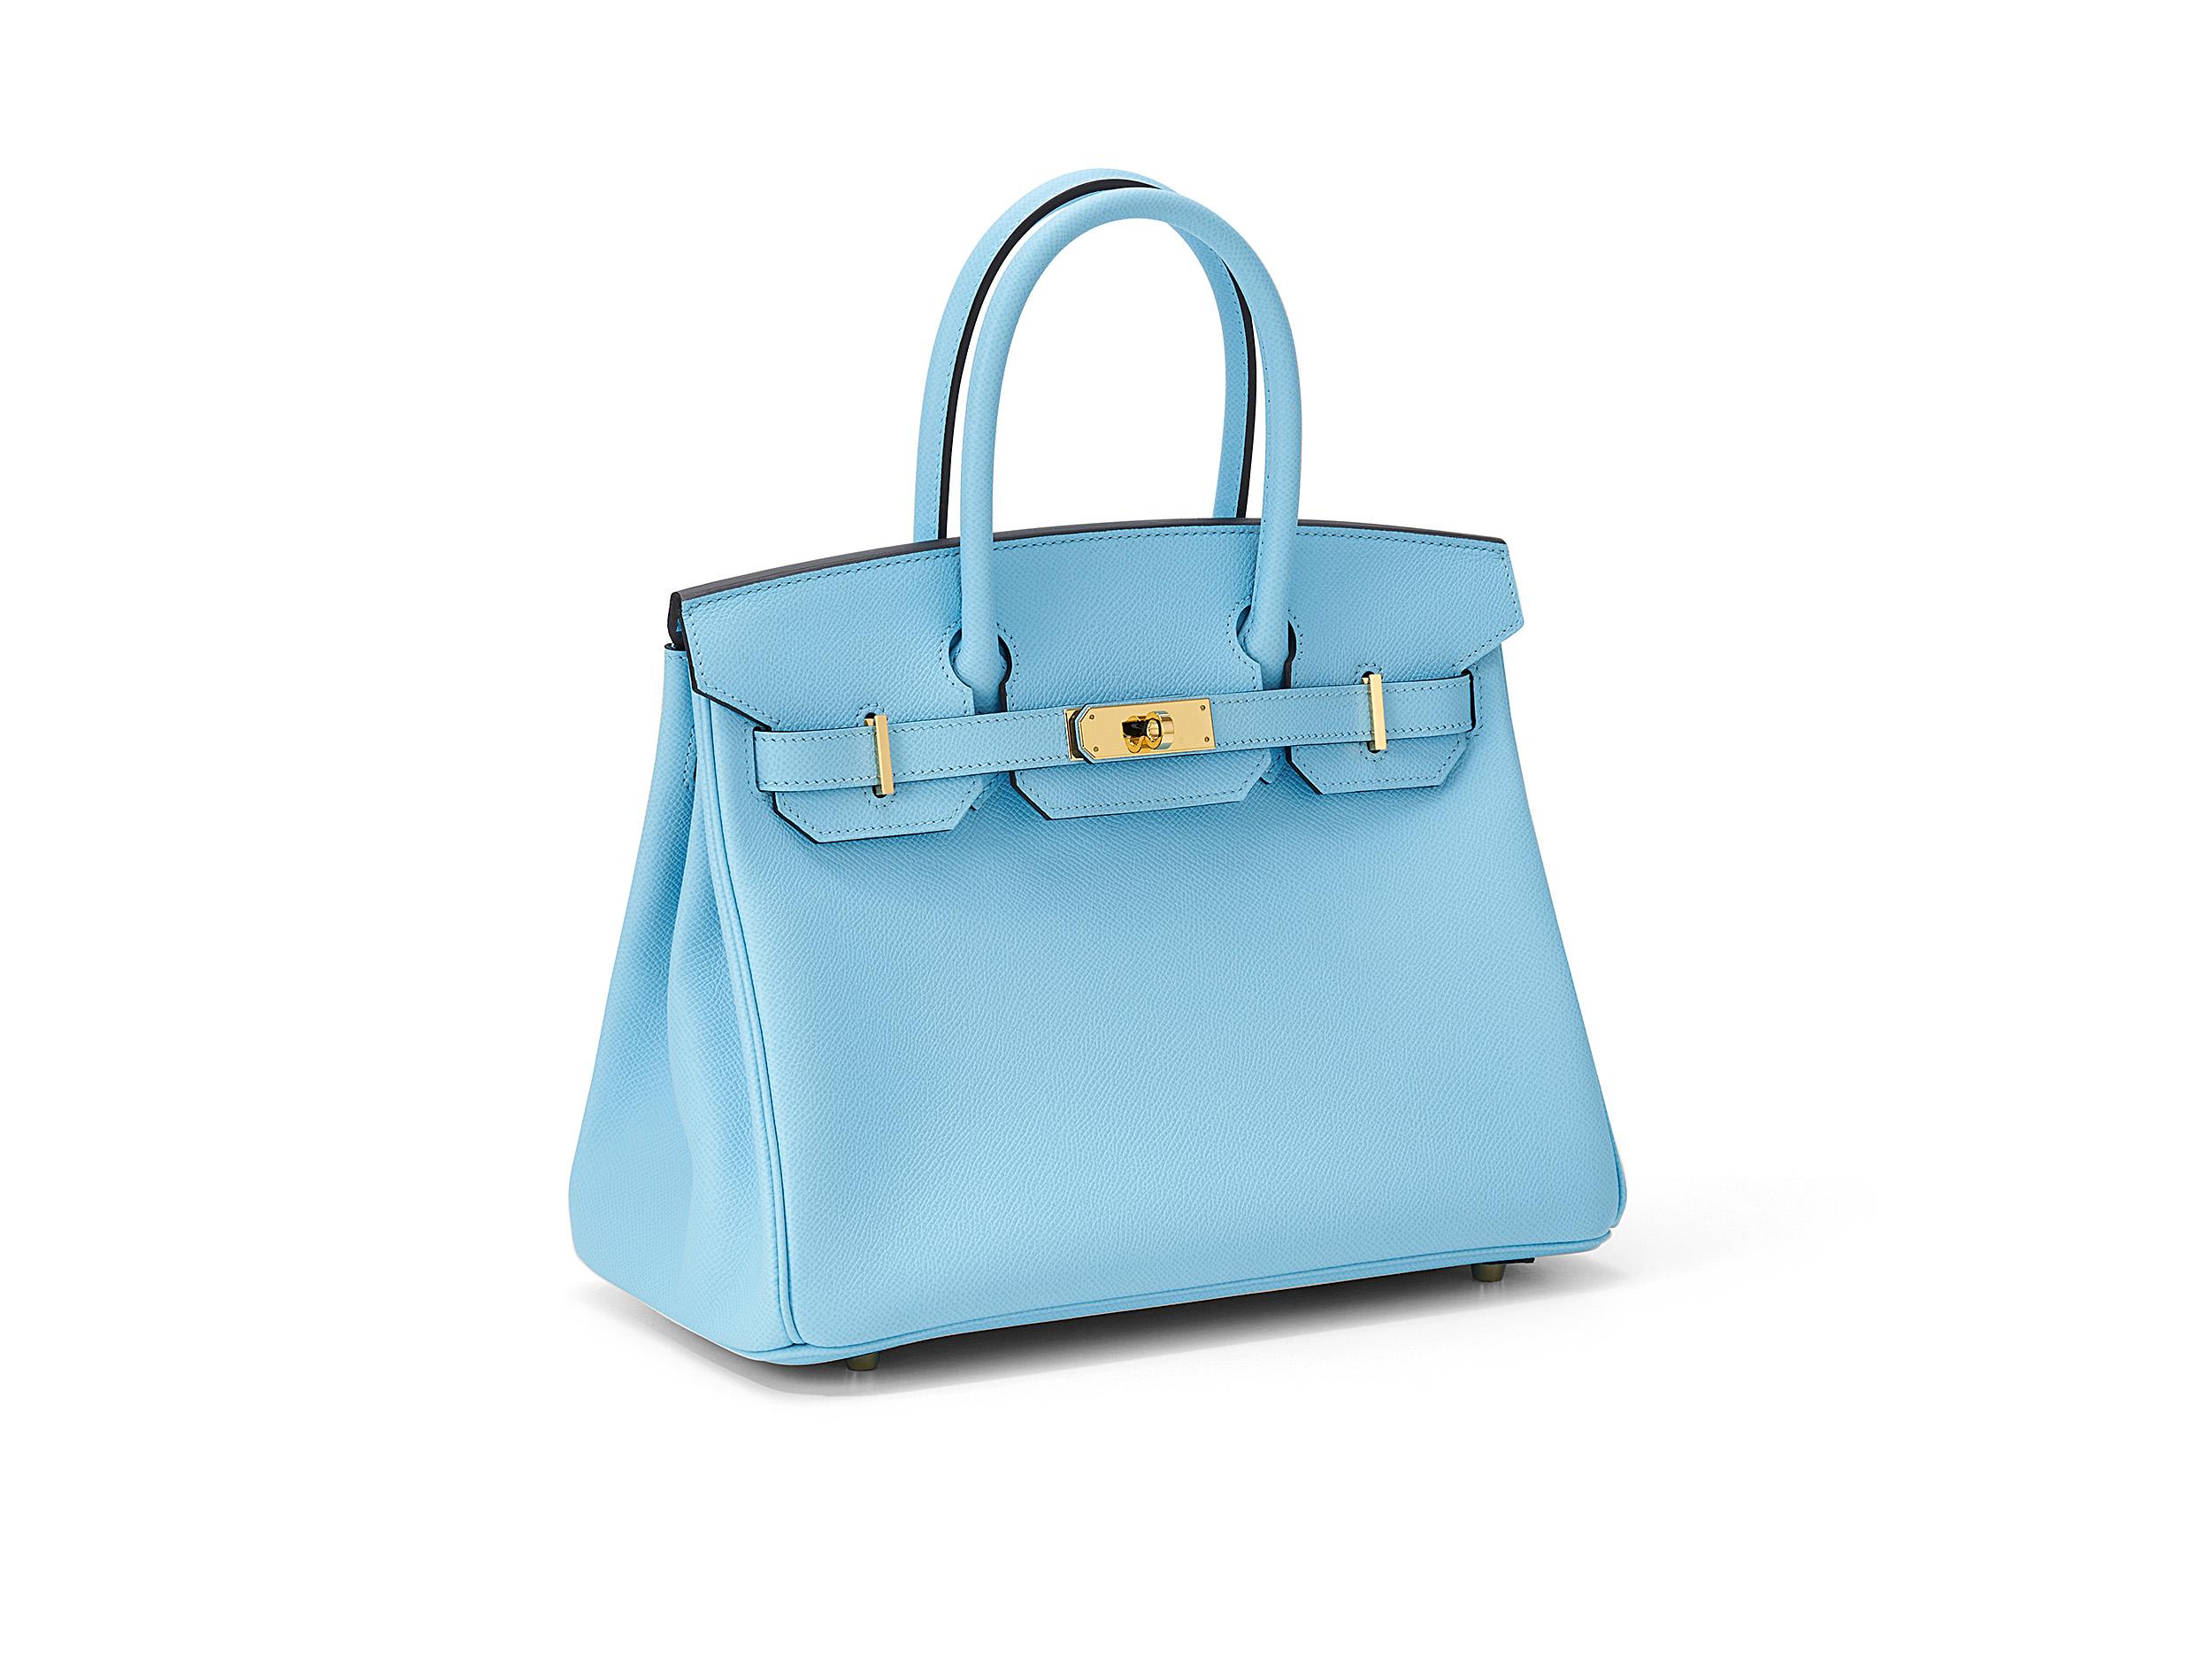 Hermès Birkin 30 in bleu celeste and epsom leather with gold hardware. The bag is unworn with almost unvisible scratches on the hardware and comes as full set including the original receipt. Stamp D (2019) 